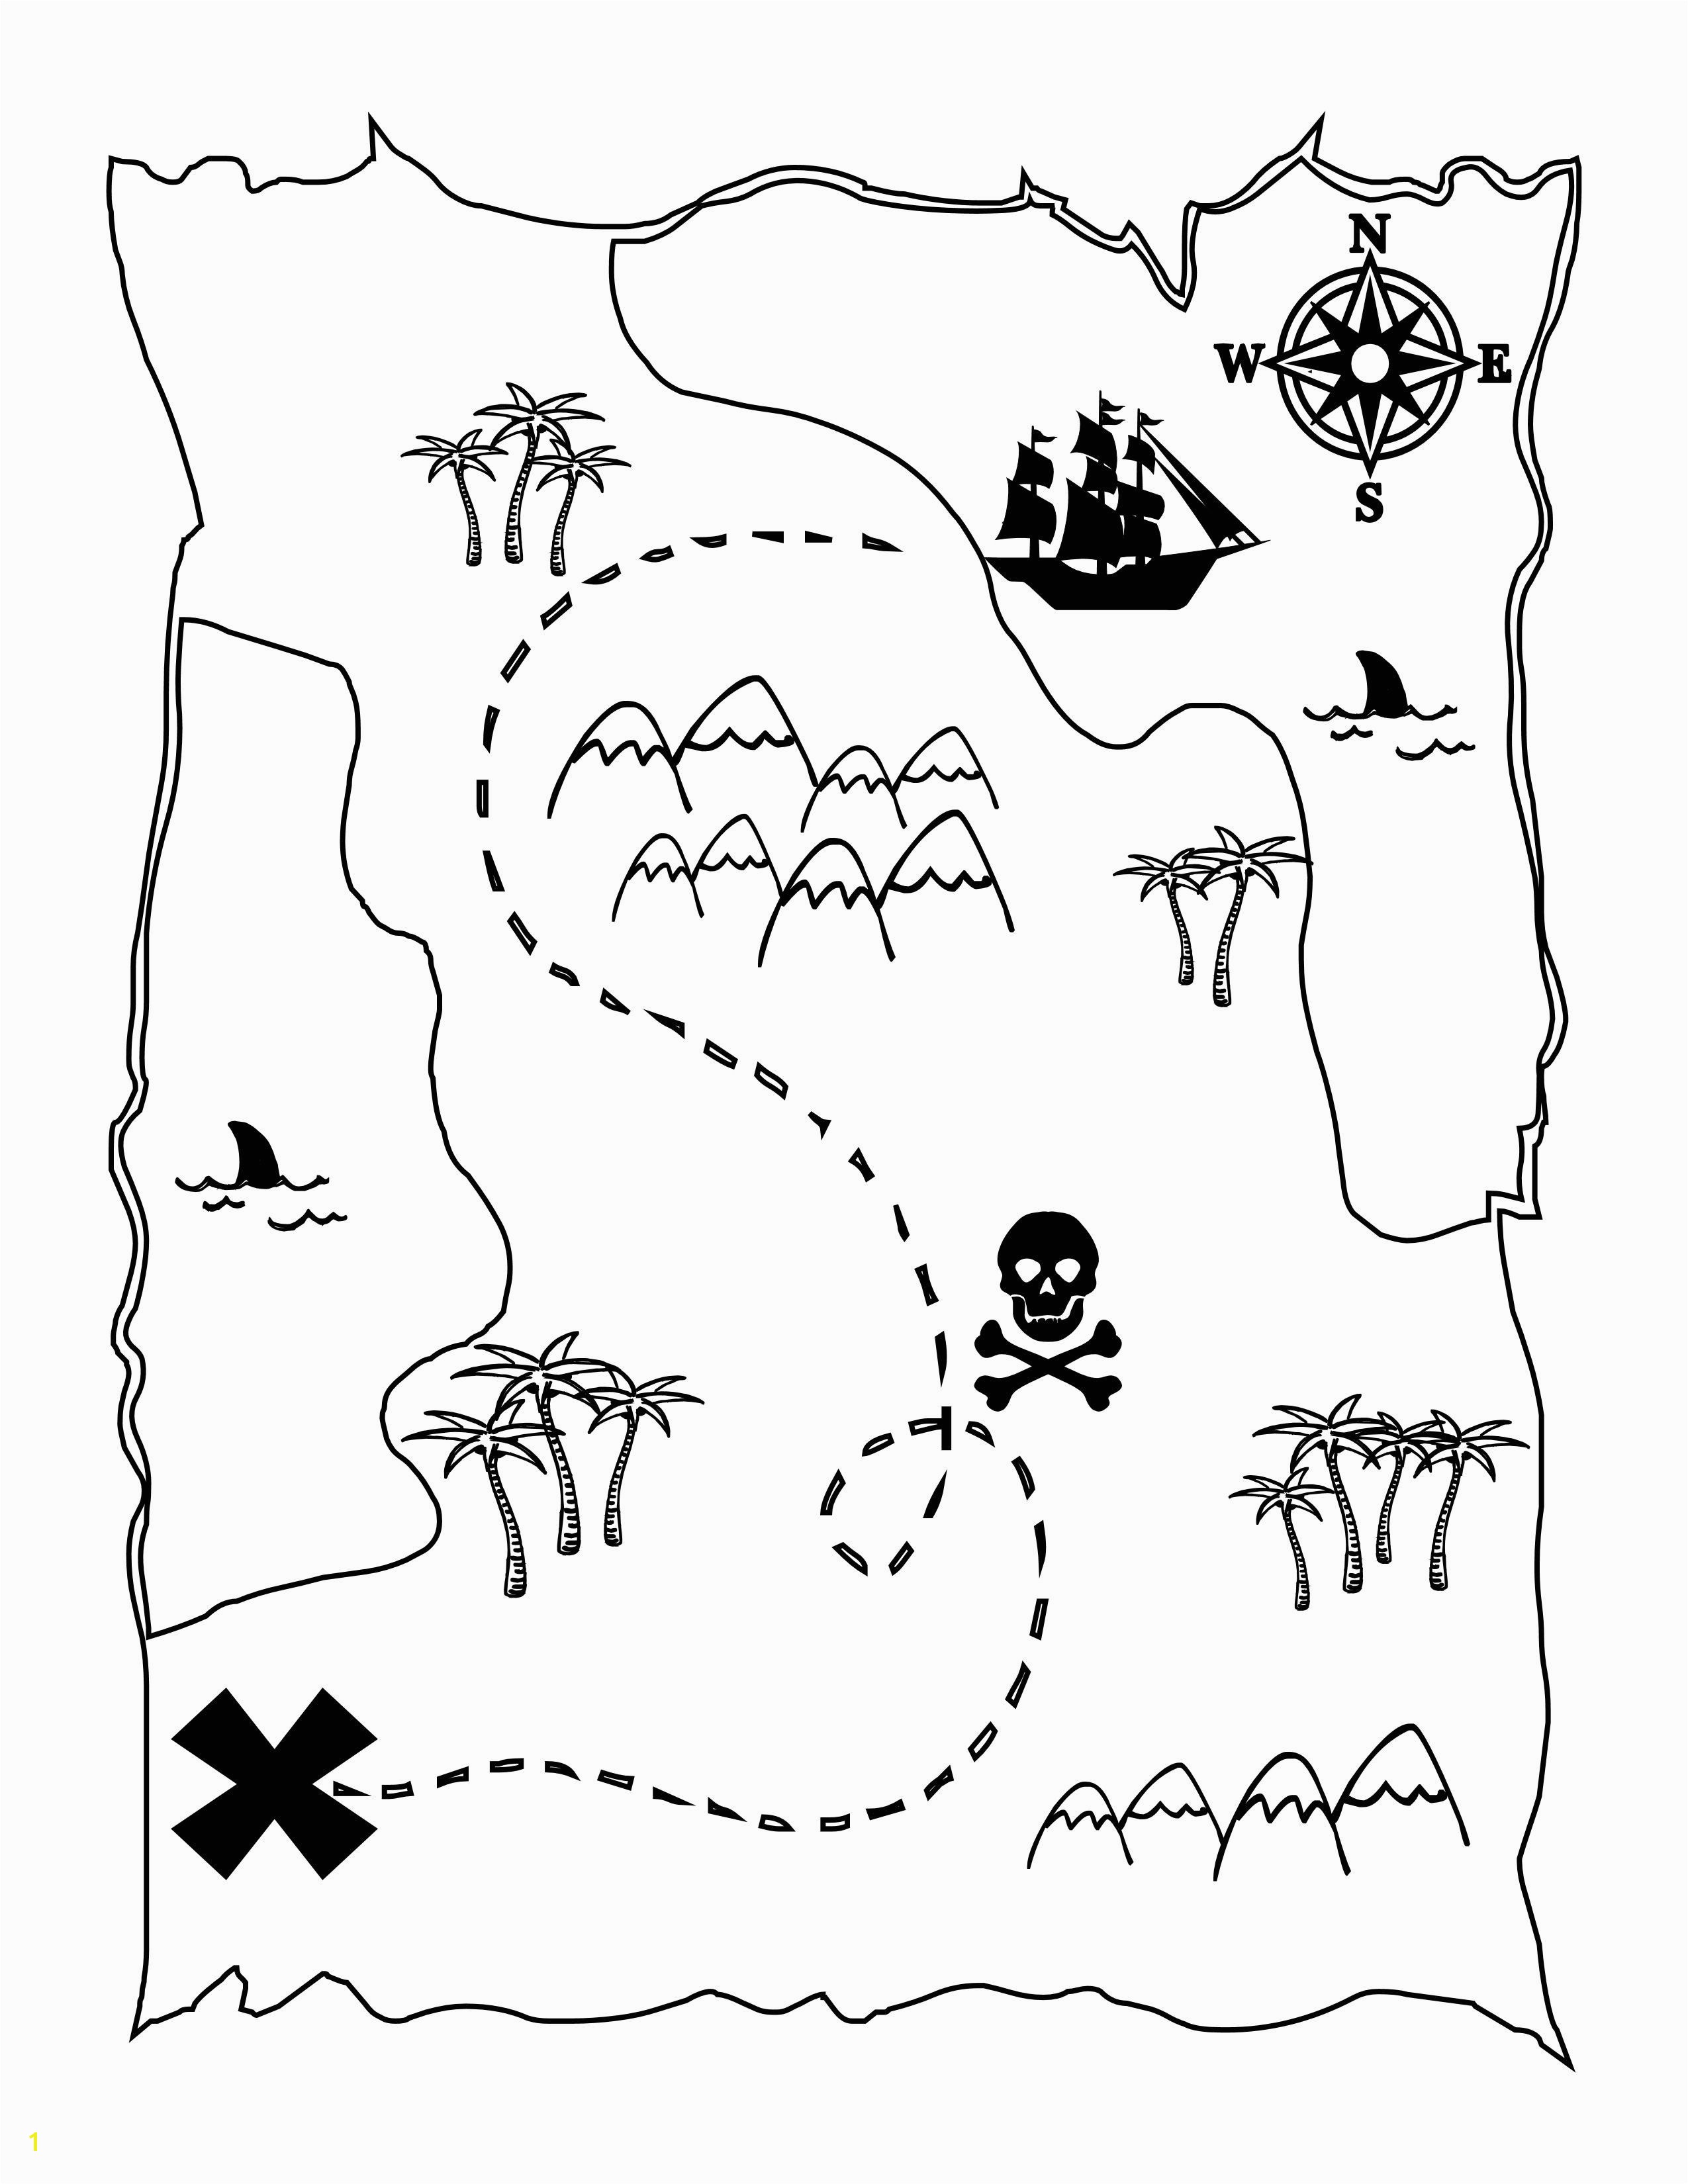 FREE Printable Pirate Map a fun coloring page for the kids lilluna 